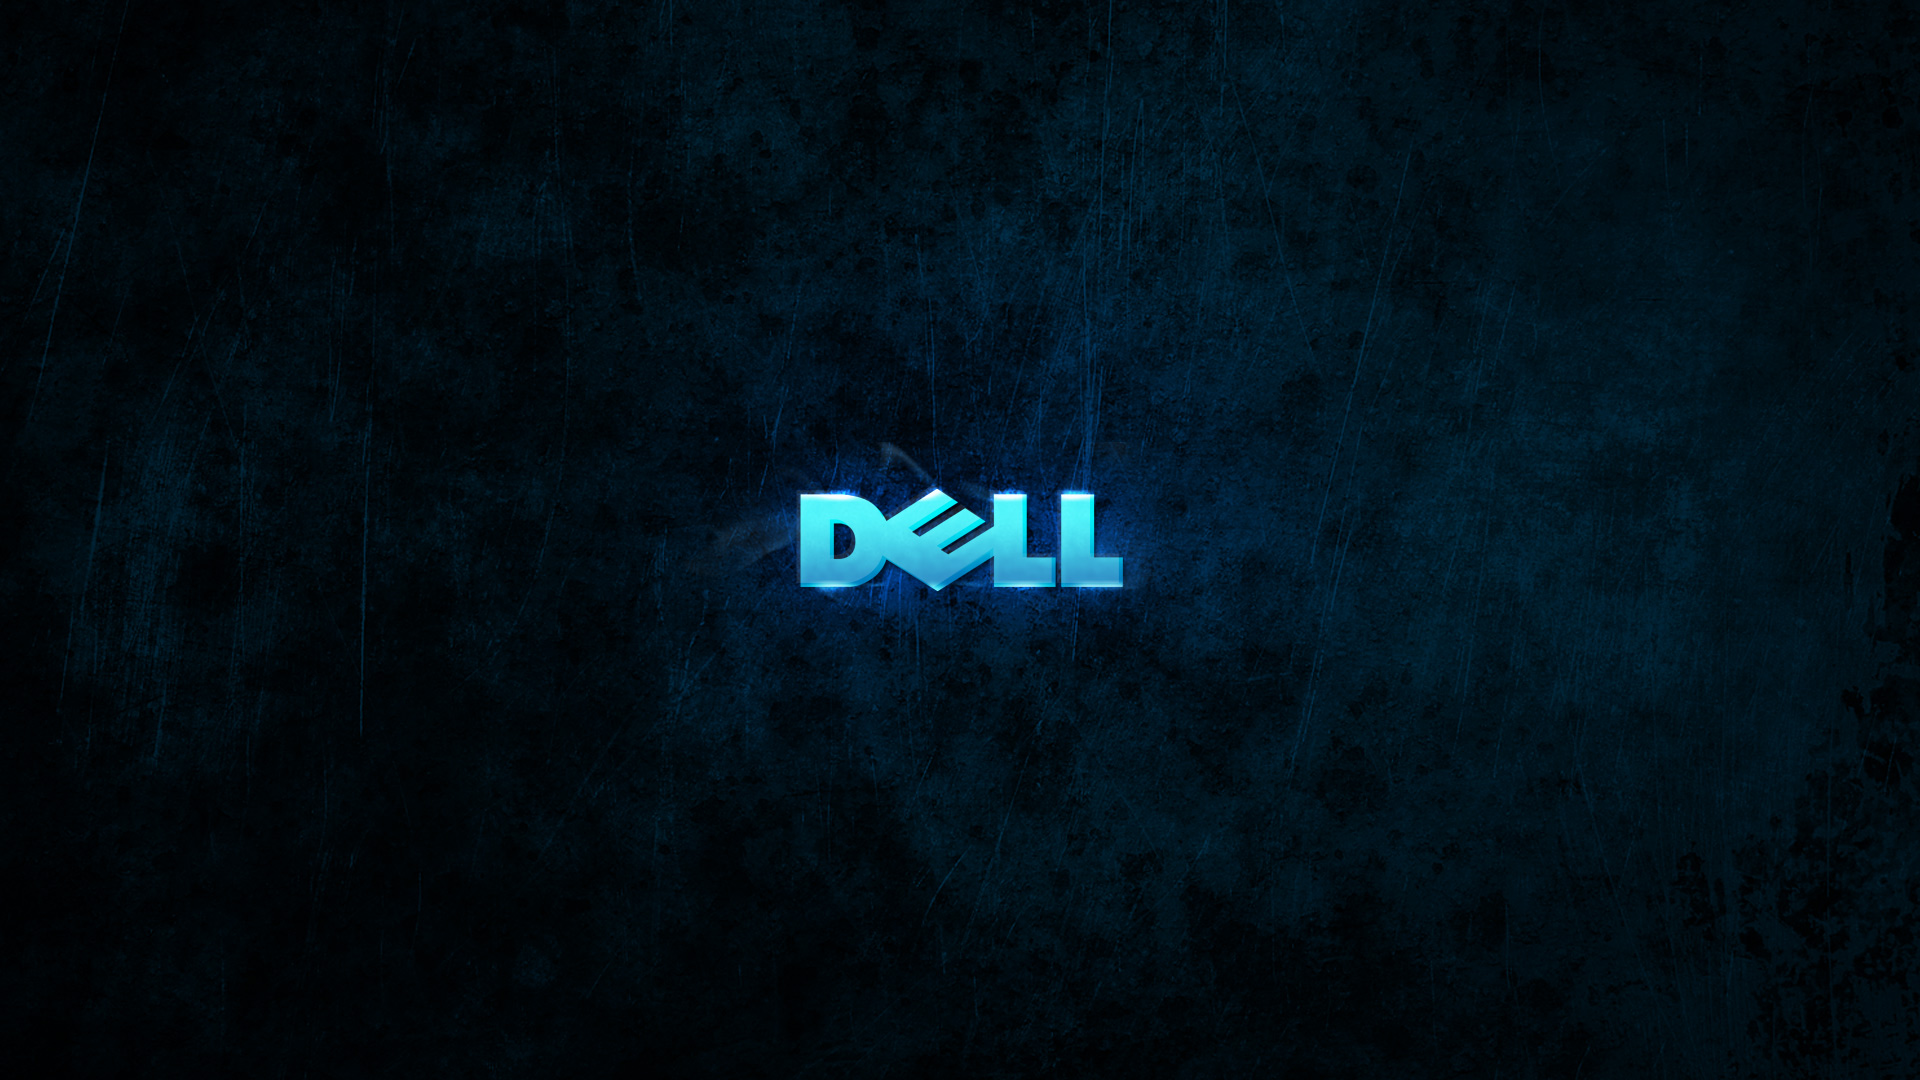 Dell Dark Wallpaper HD1080 By Malkowitch